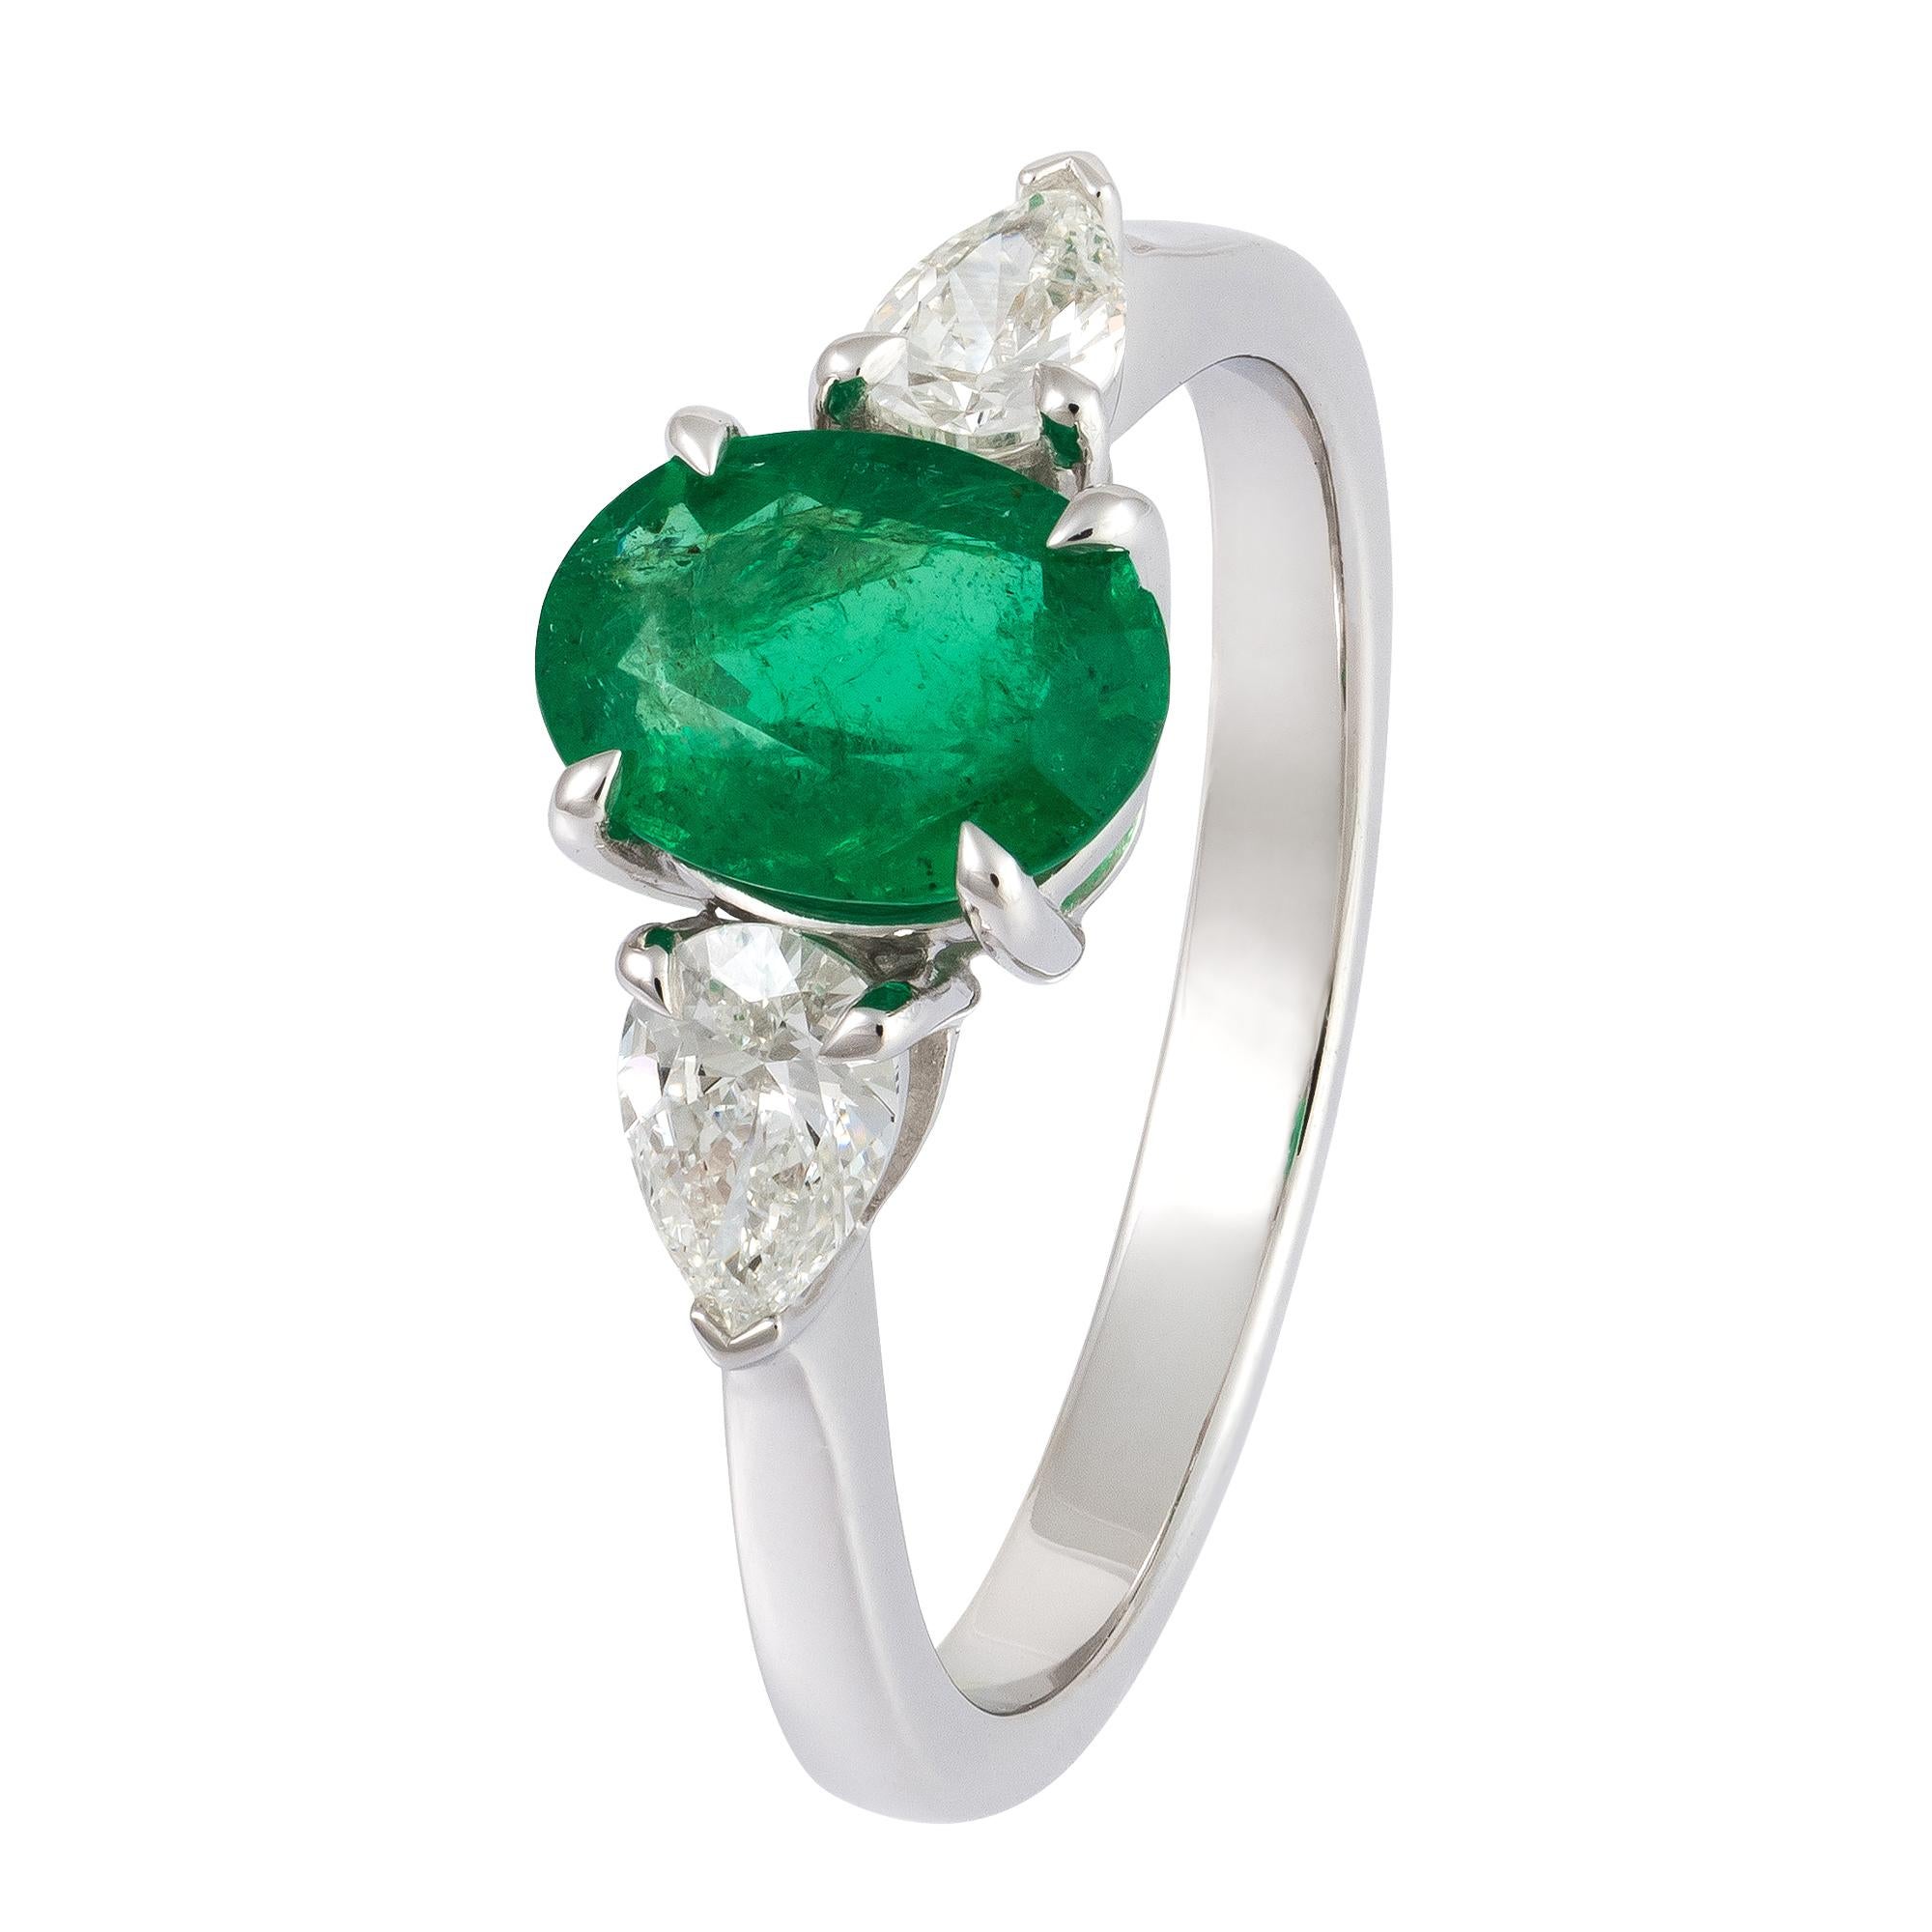 The Following Item we are offering is this Rare Important Radiant 18KT Gold Gorgeous Glittering and Sparkling Magnificent Fancy Oval Shaped Green Emerald and Fancy Pear Shaped Diamond Ring. Ring Contains approx 2CTS of Beautiful Fancy Oval Cut